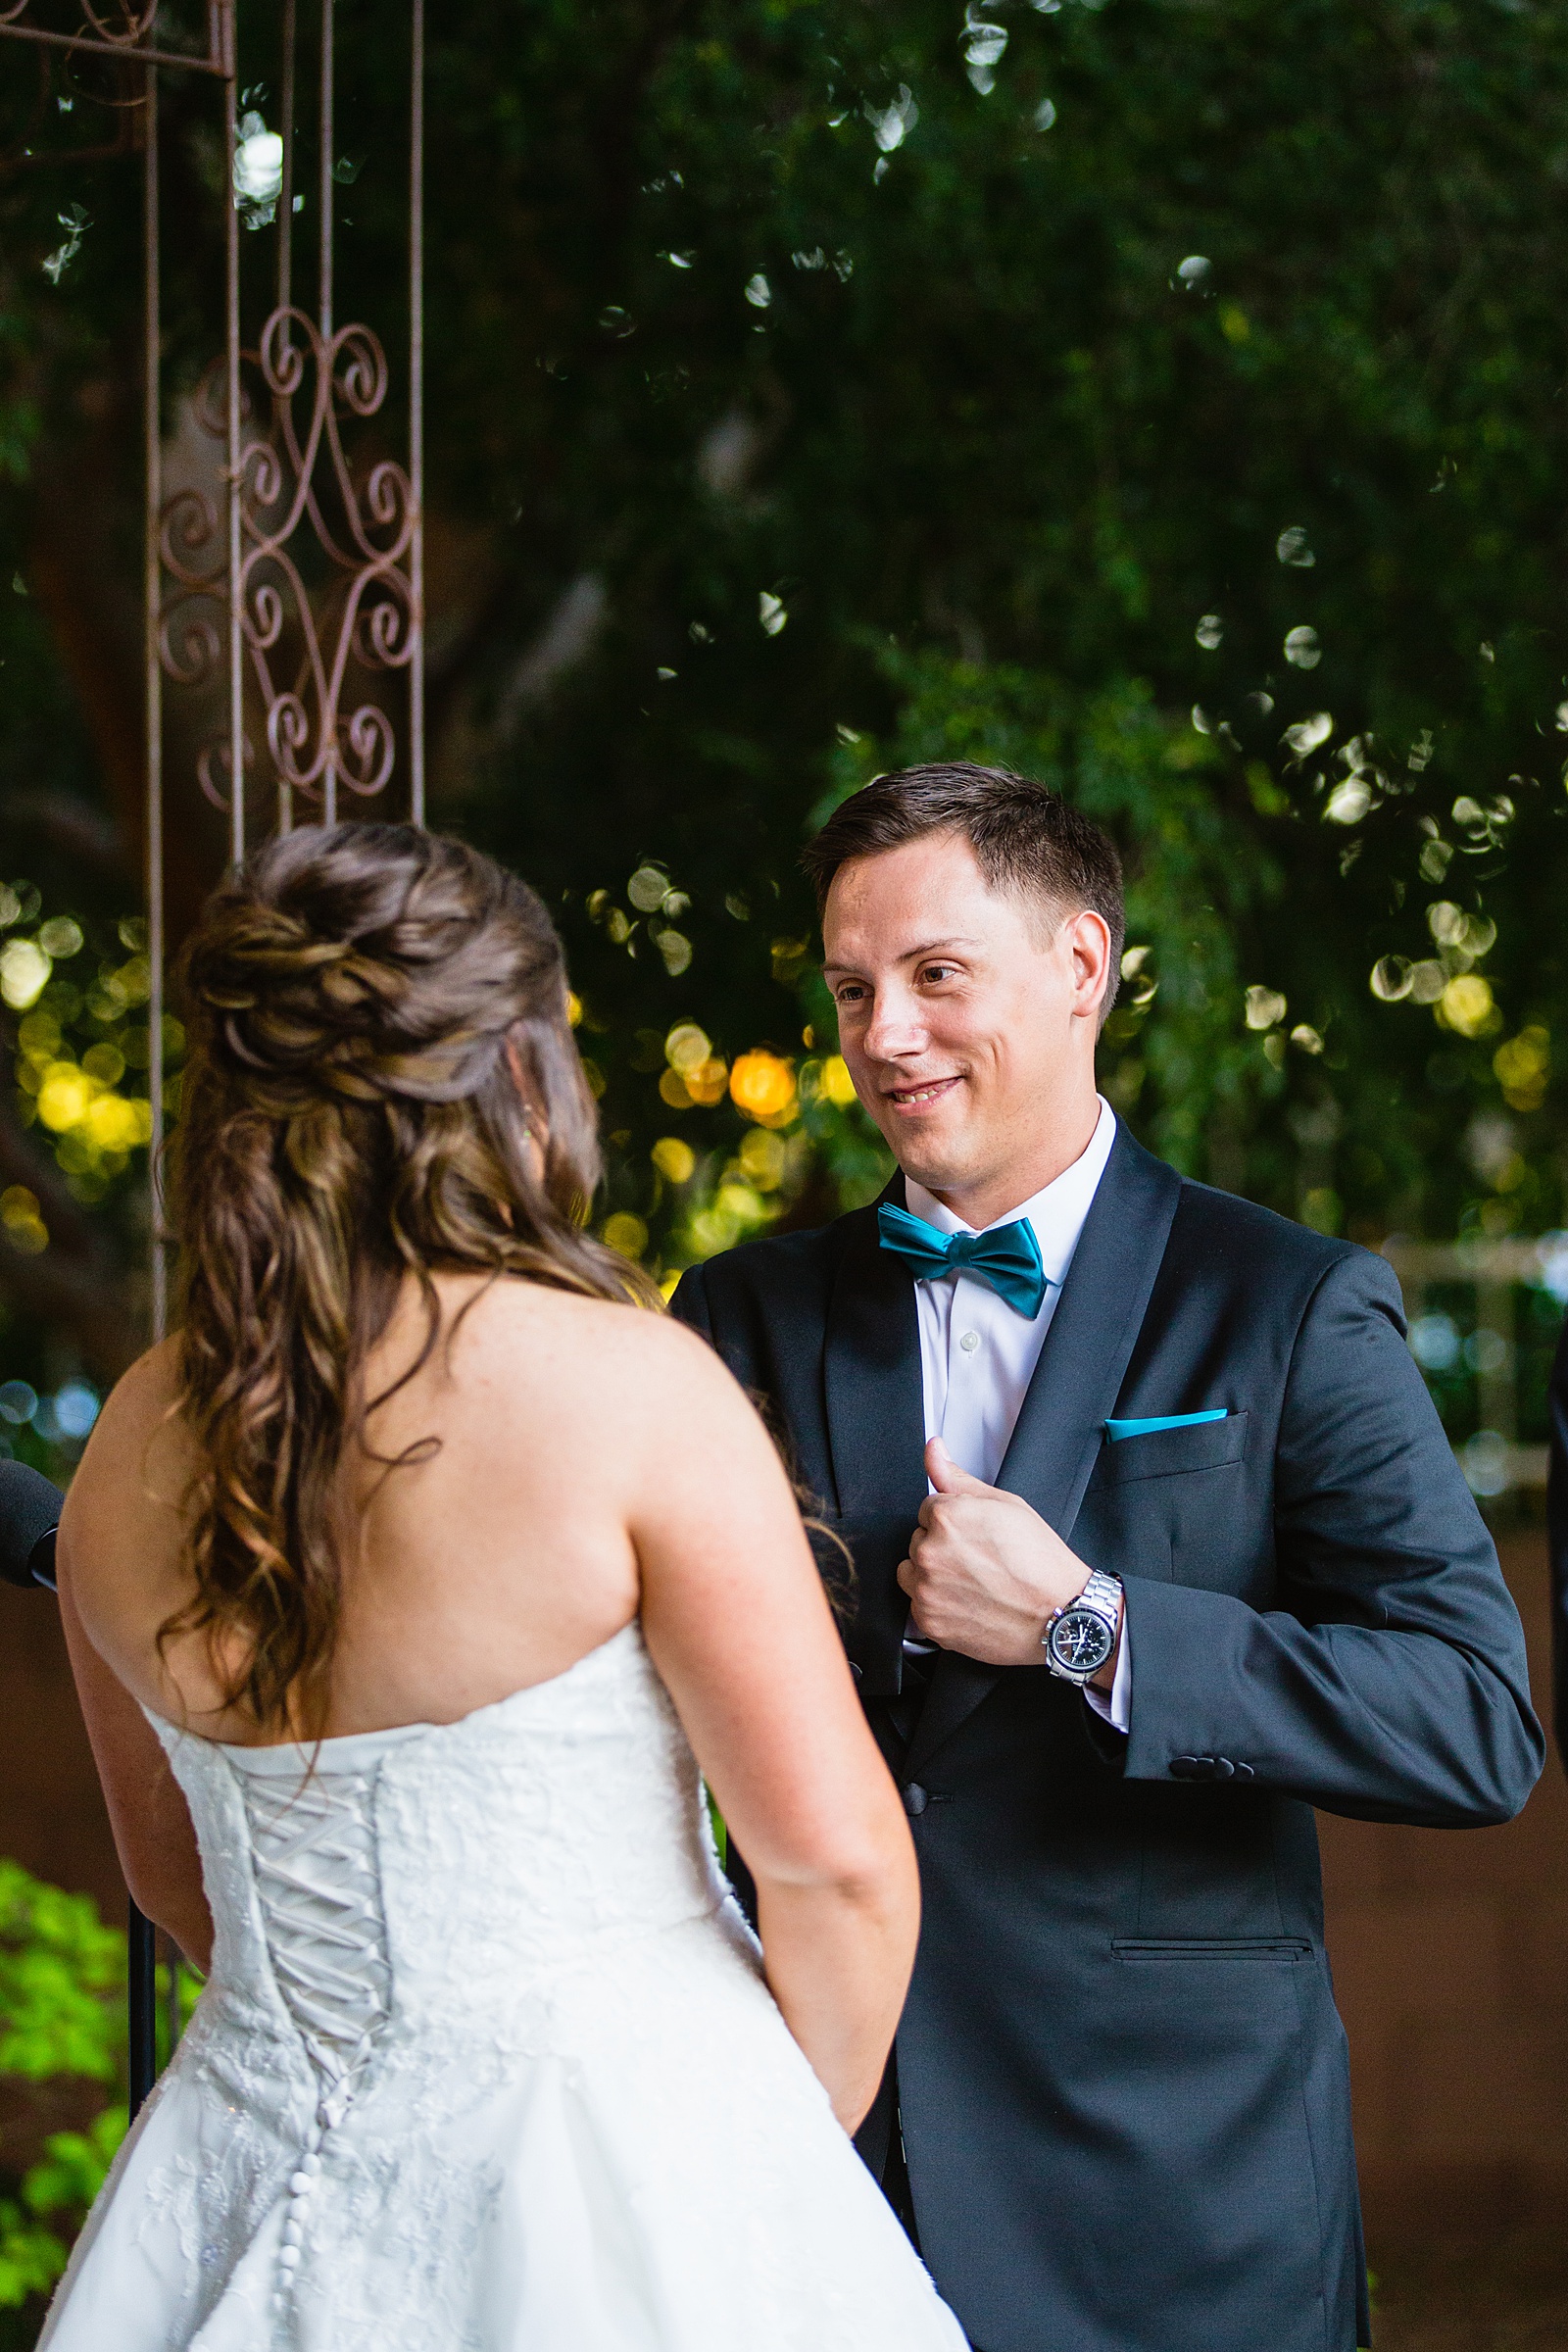 Groom looking at his bride during their wedding ceremony at Stonebridge Manor by Mesa wedding photographer PMA Photography.